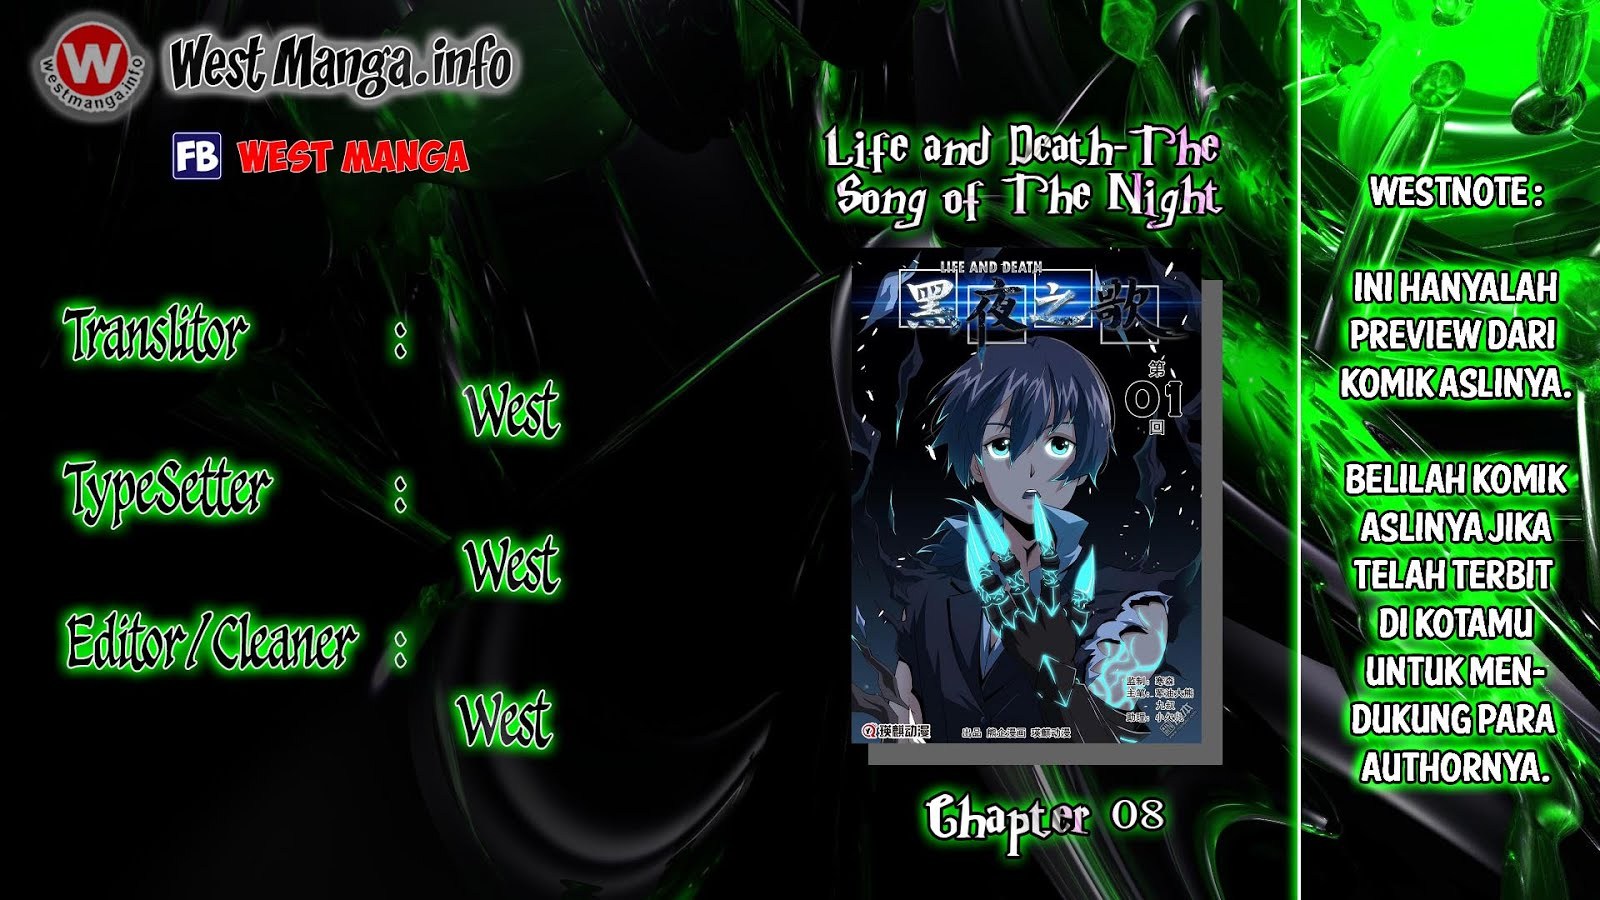 Life and Death-The Song of The Night Chapter 08